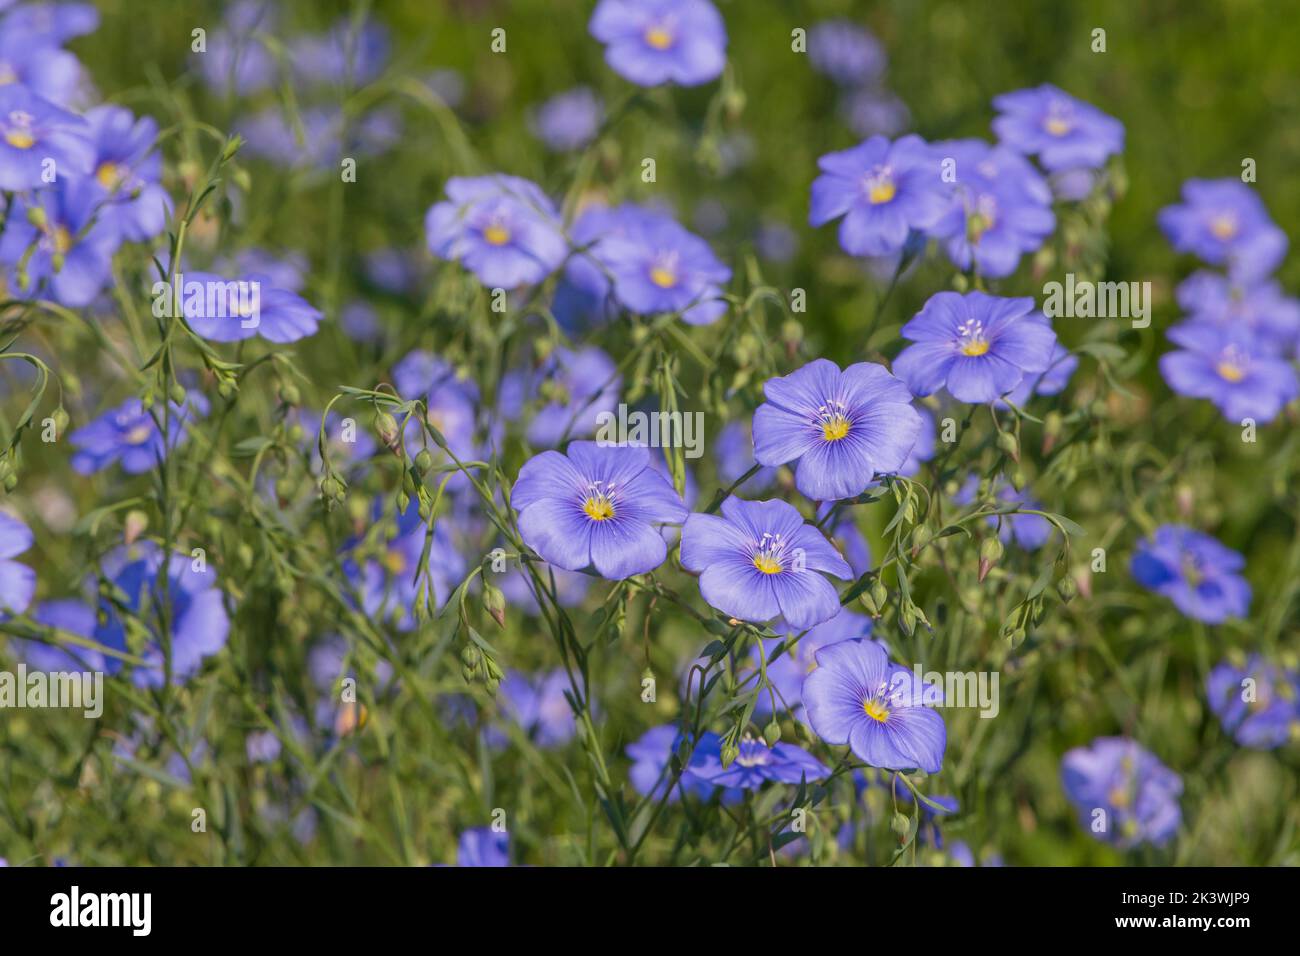 blue common flax flowers in a garden at summer Stock Photo